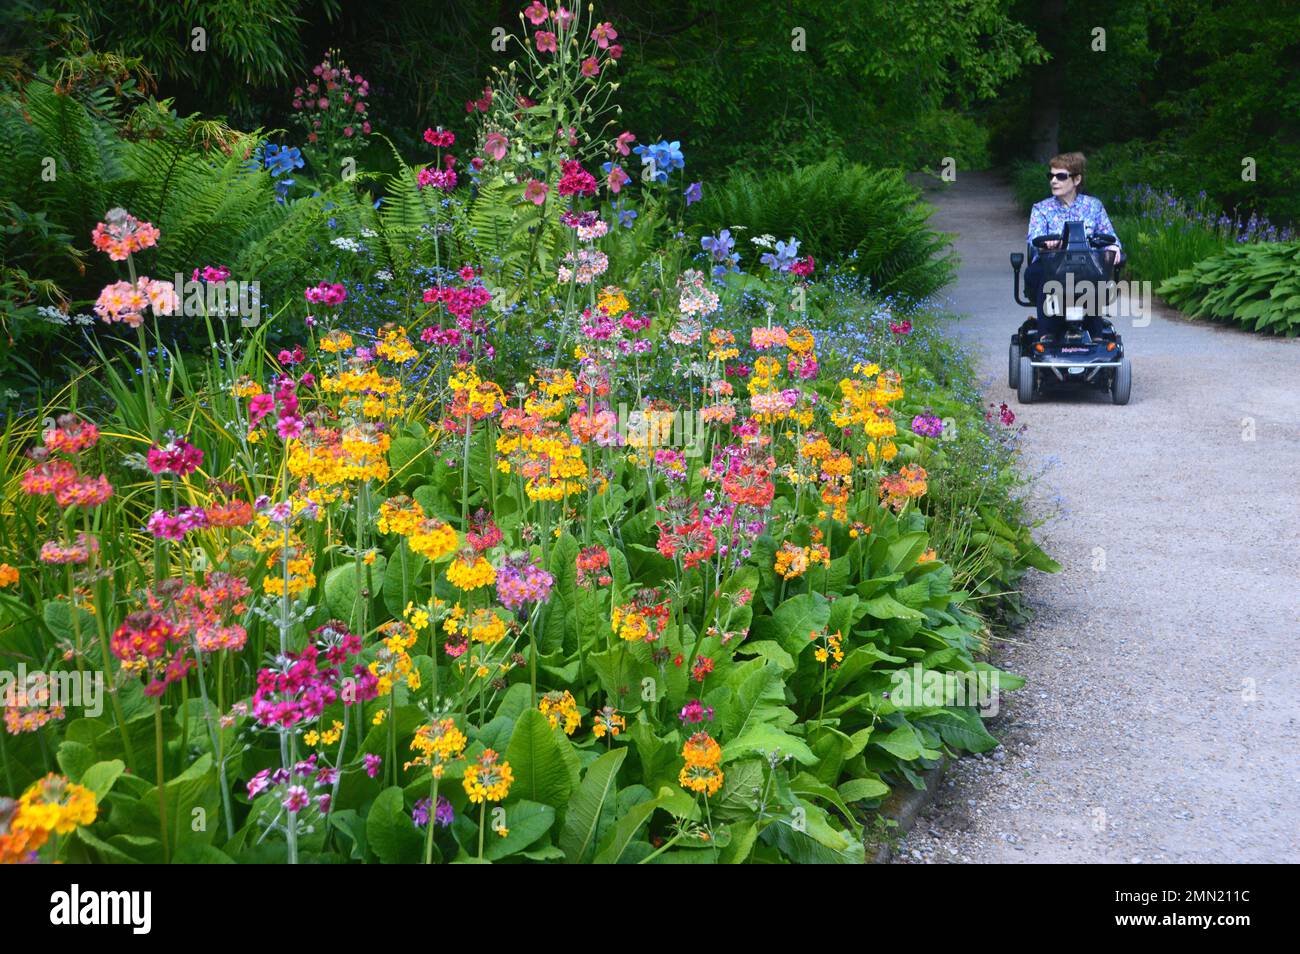 Woman in Motorised Wheelchair by Rainbow Mix Candelabra Primulas 'Primula Aurantiaca' Primrose Flowers grown in a Border at RHS Garden Harlow Carr. Stock Photo